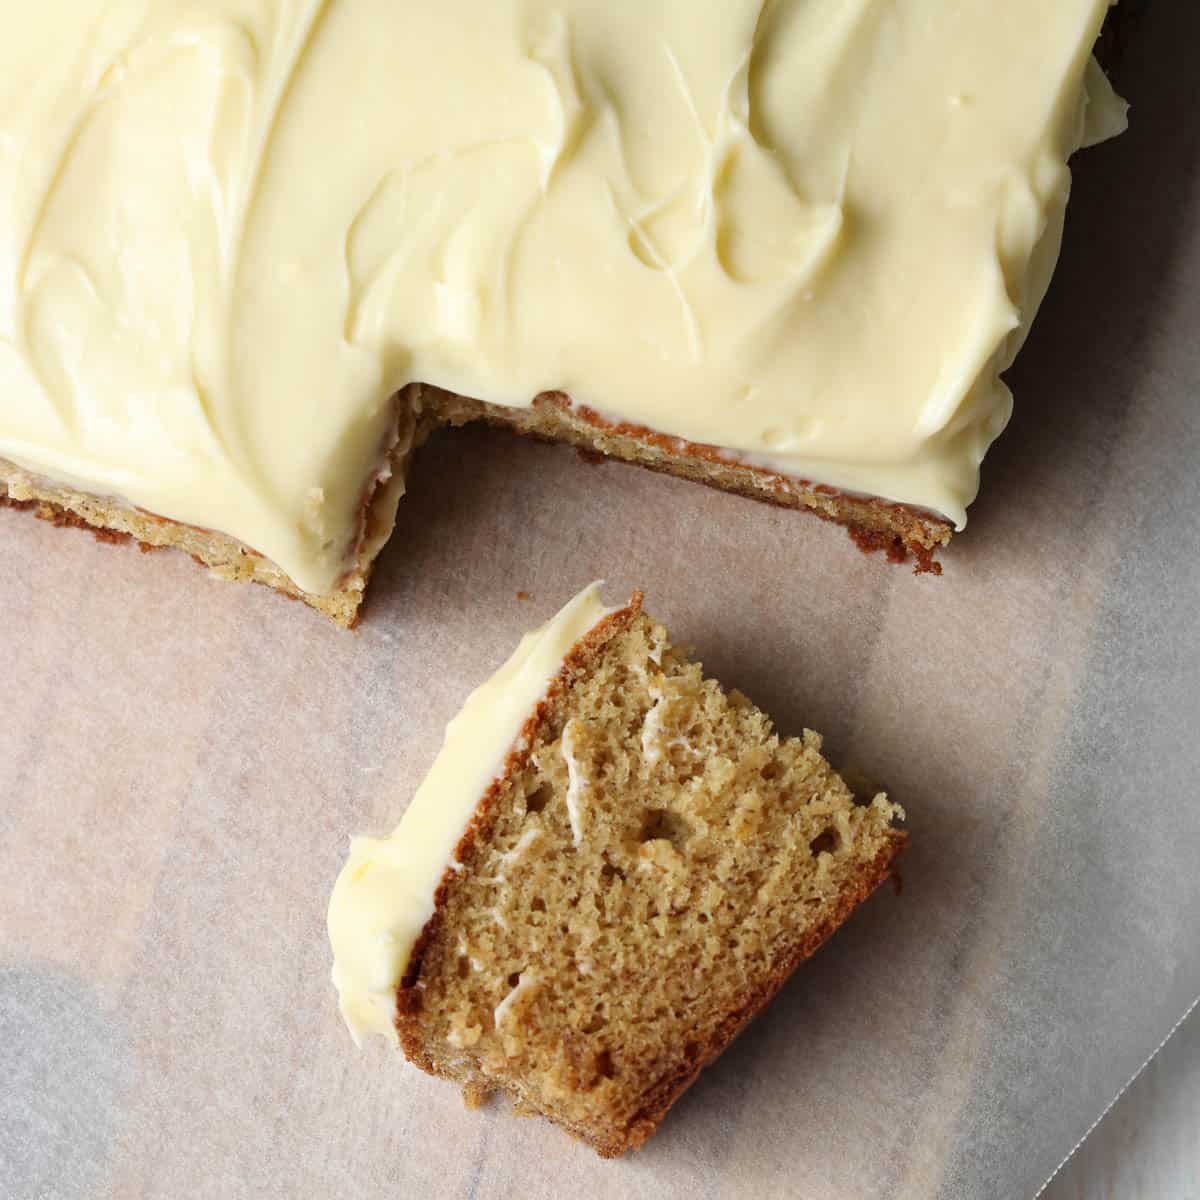 Thermomix Banana Cake with Cream Cheese Frosting.